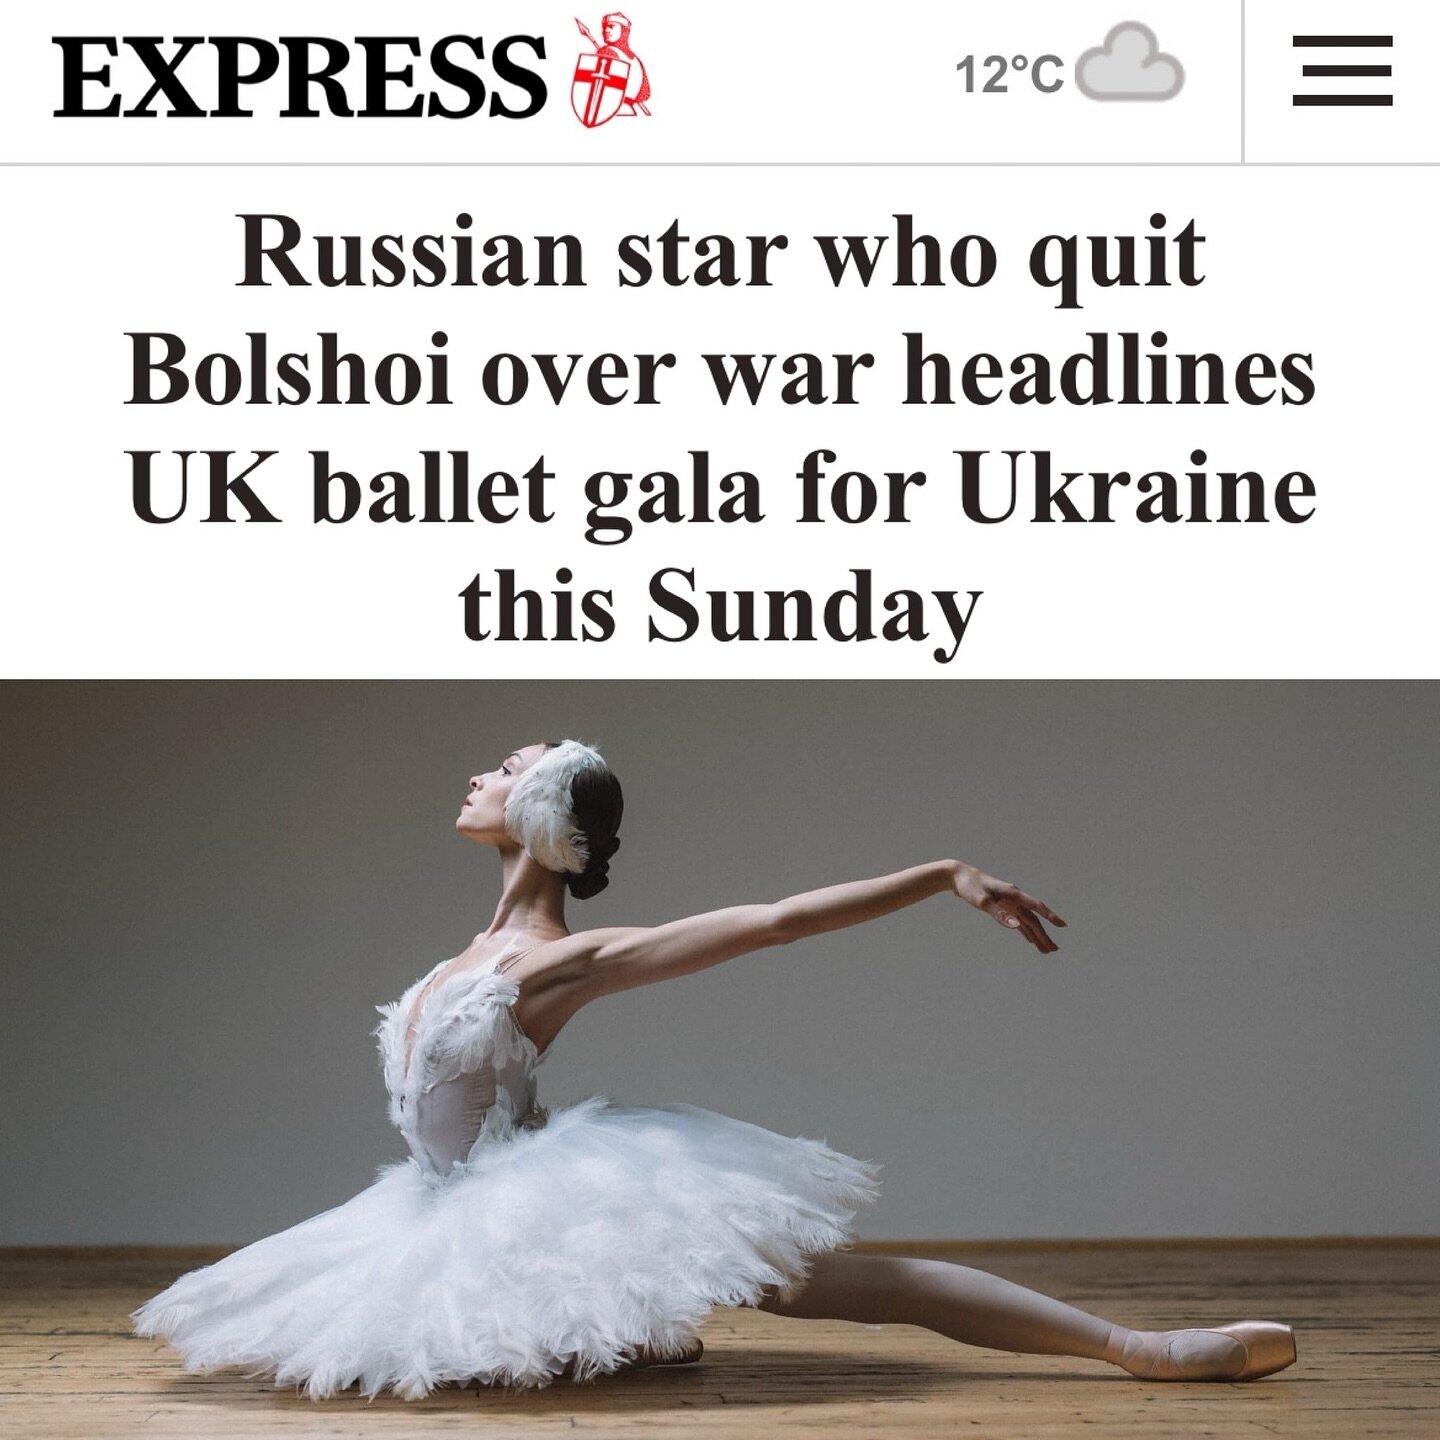 Tomorrow Dance for Ukraine comes to the @thelondonpalladium. Bringing together some of the world&rsquo;s best dancers to raise money to support the arts in Ukraine. Thanks to @dailyexpress for the feature! 

📸 Darian Volkova